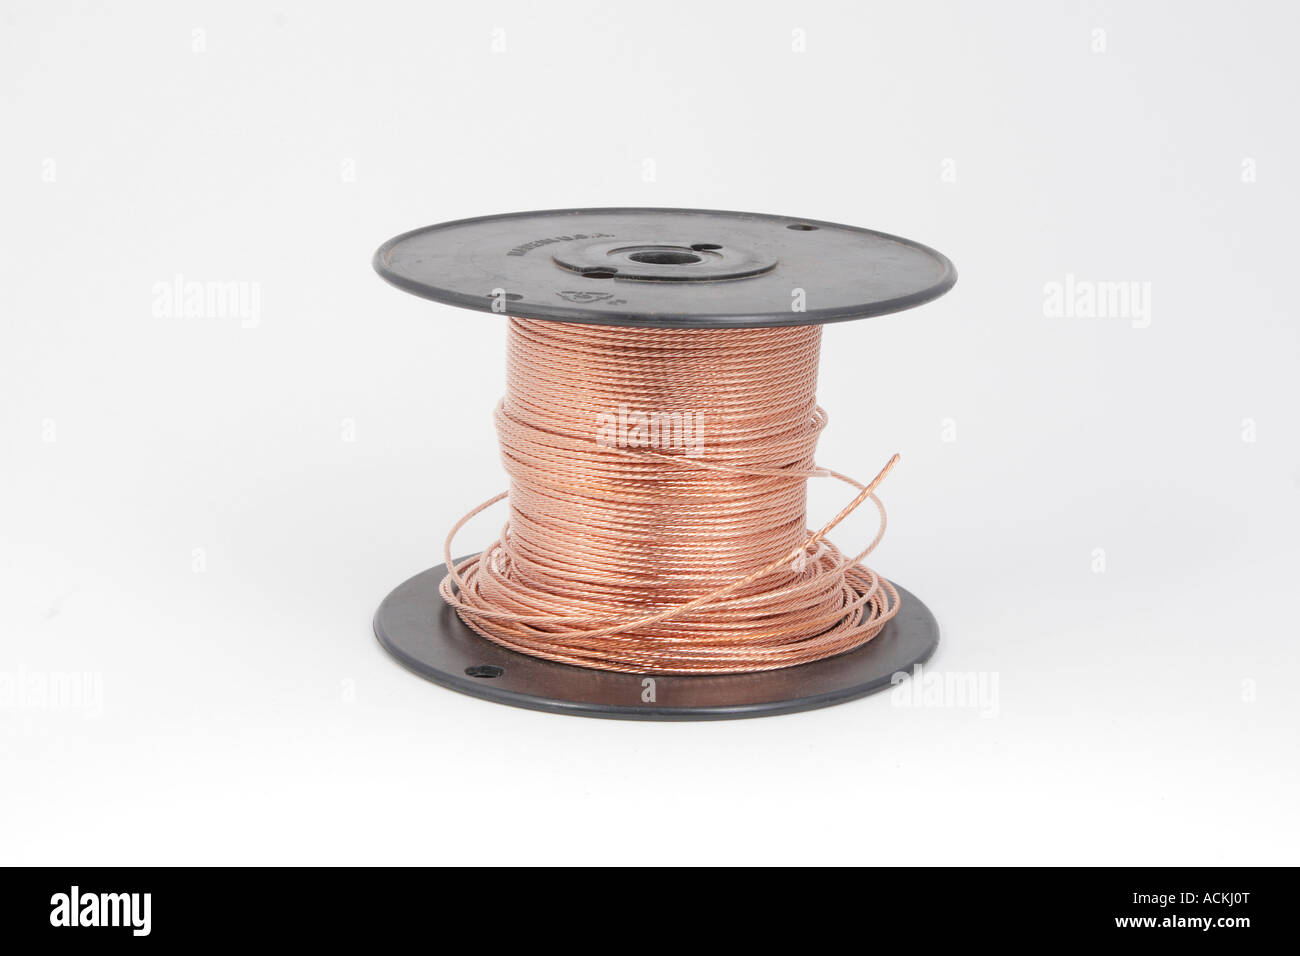 Spool of stranded copper wire on black plastic wire reel Stock Photo